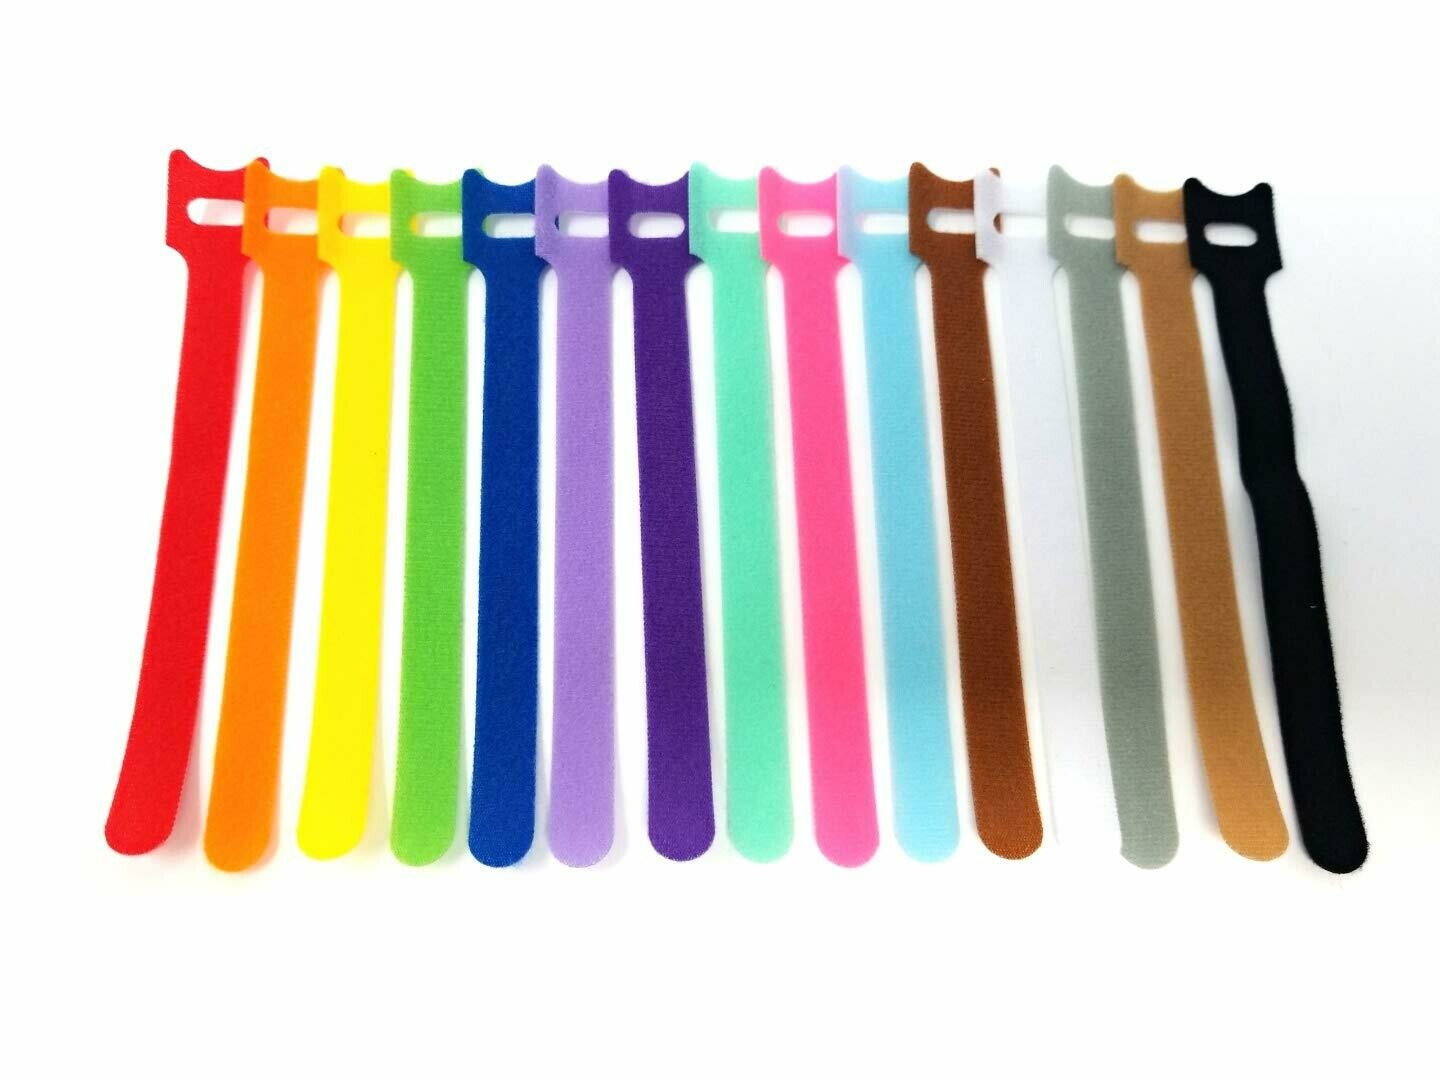 Tag-A-Room Color Coded Reusable Fastening Cable Ties/Organizer, Cable Straps, Hook and Loop Microfiber 6 Inch (15 Count)